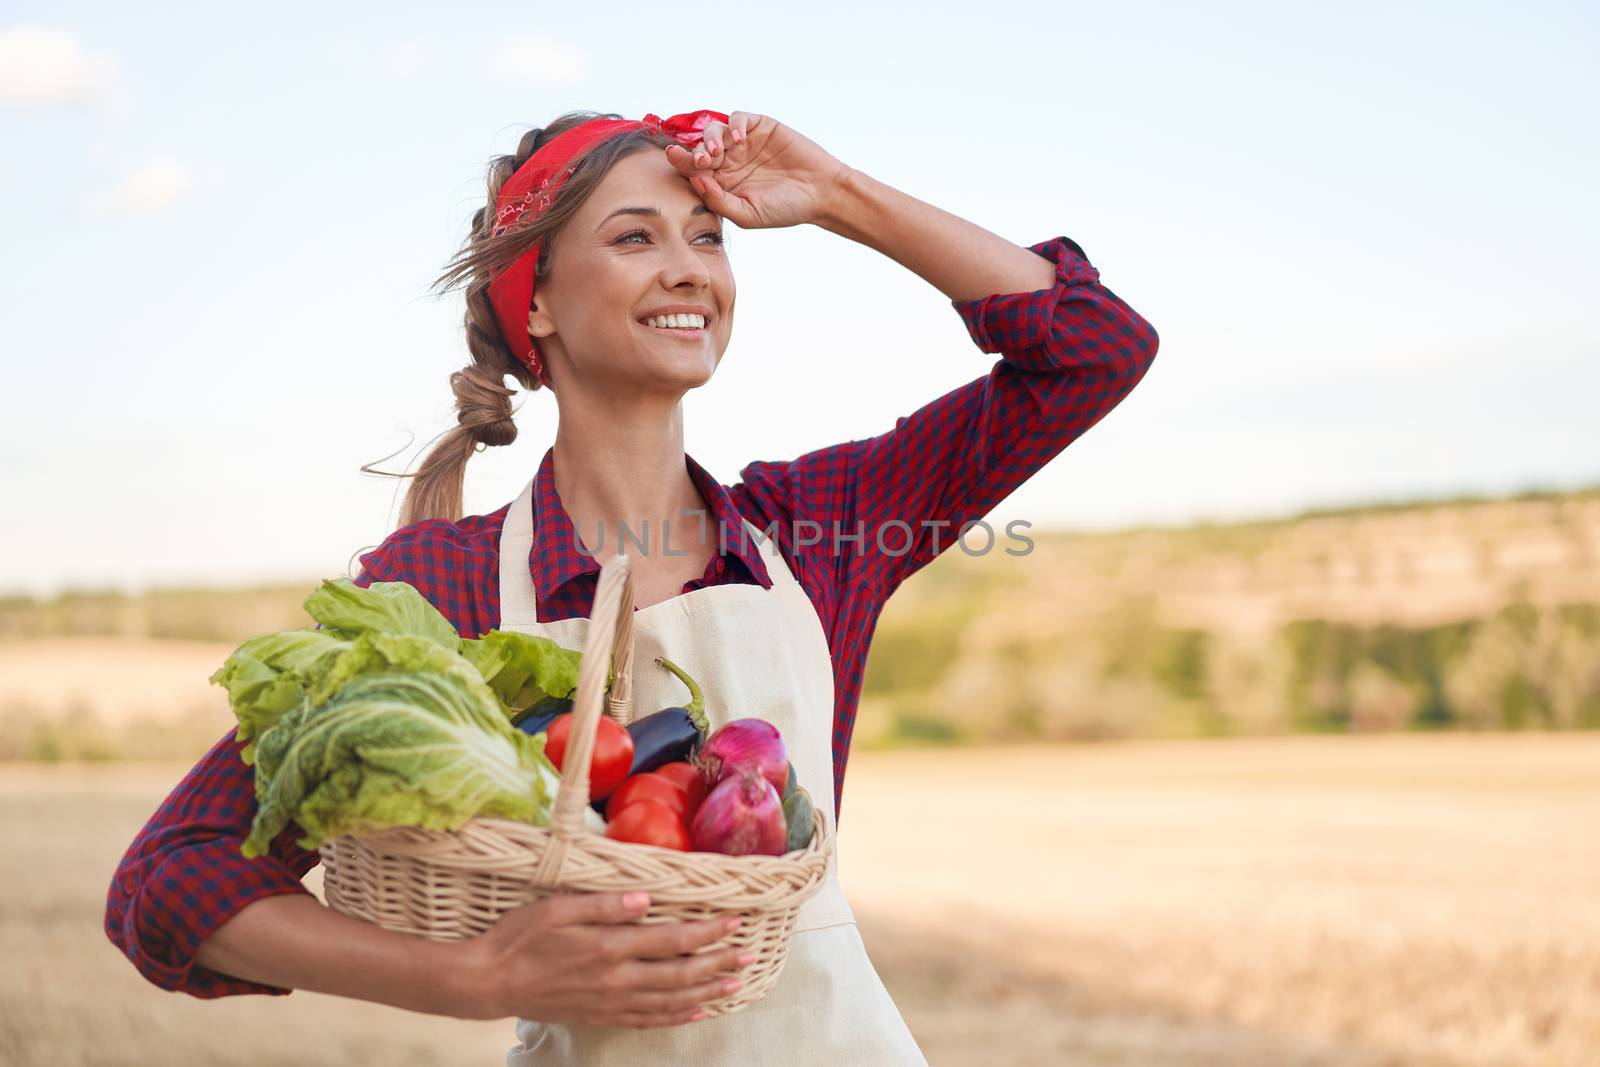 Woman farmer holding basket vegetable onion tomato salad cucumber standing farmland smiling Female agronomist specialist farming agribusiness Pretty girl dressed red checkered shirt and bandana